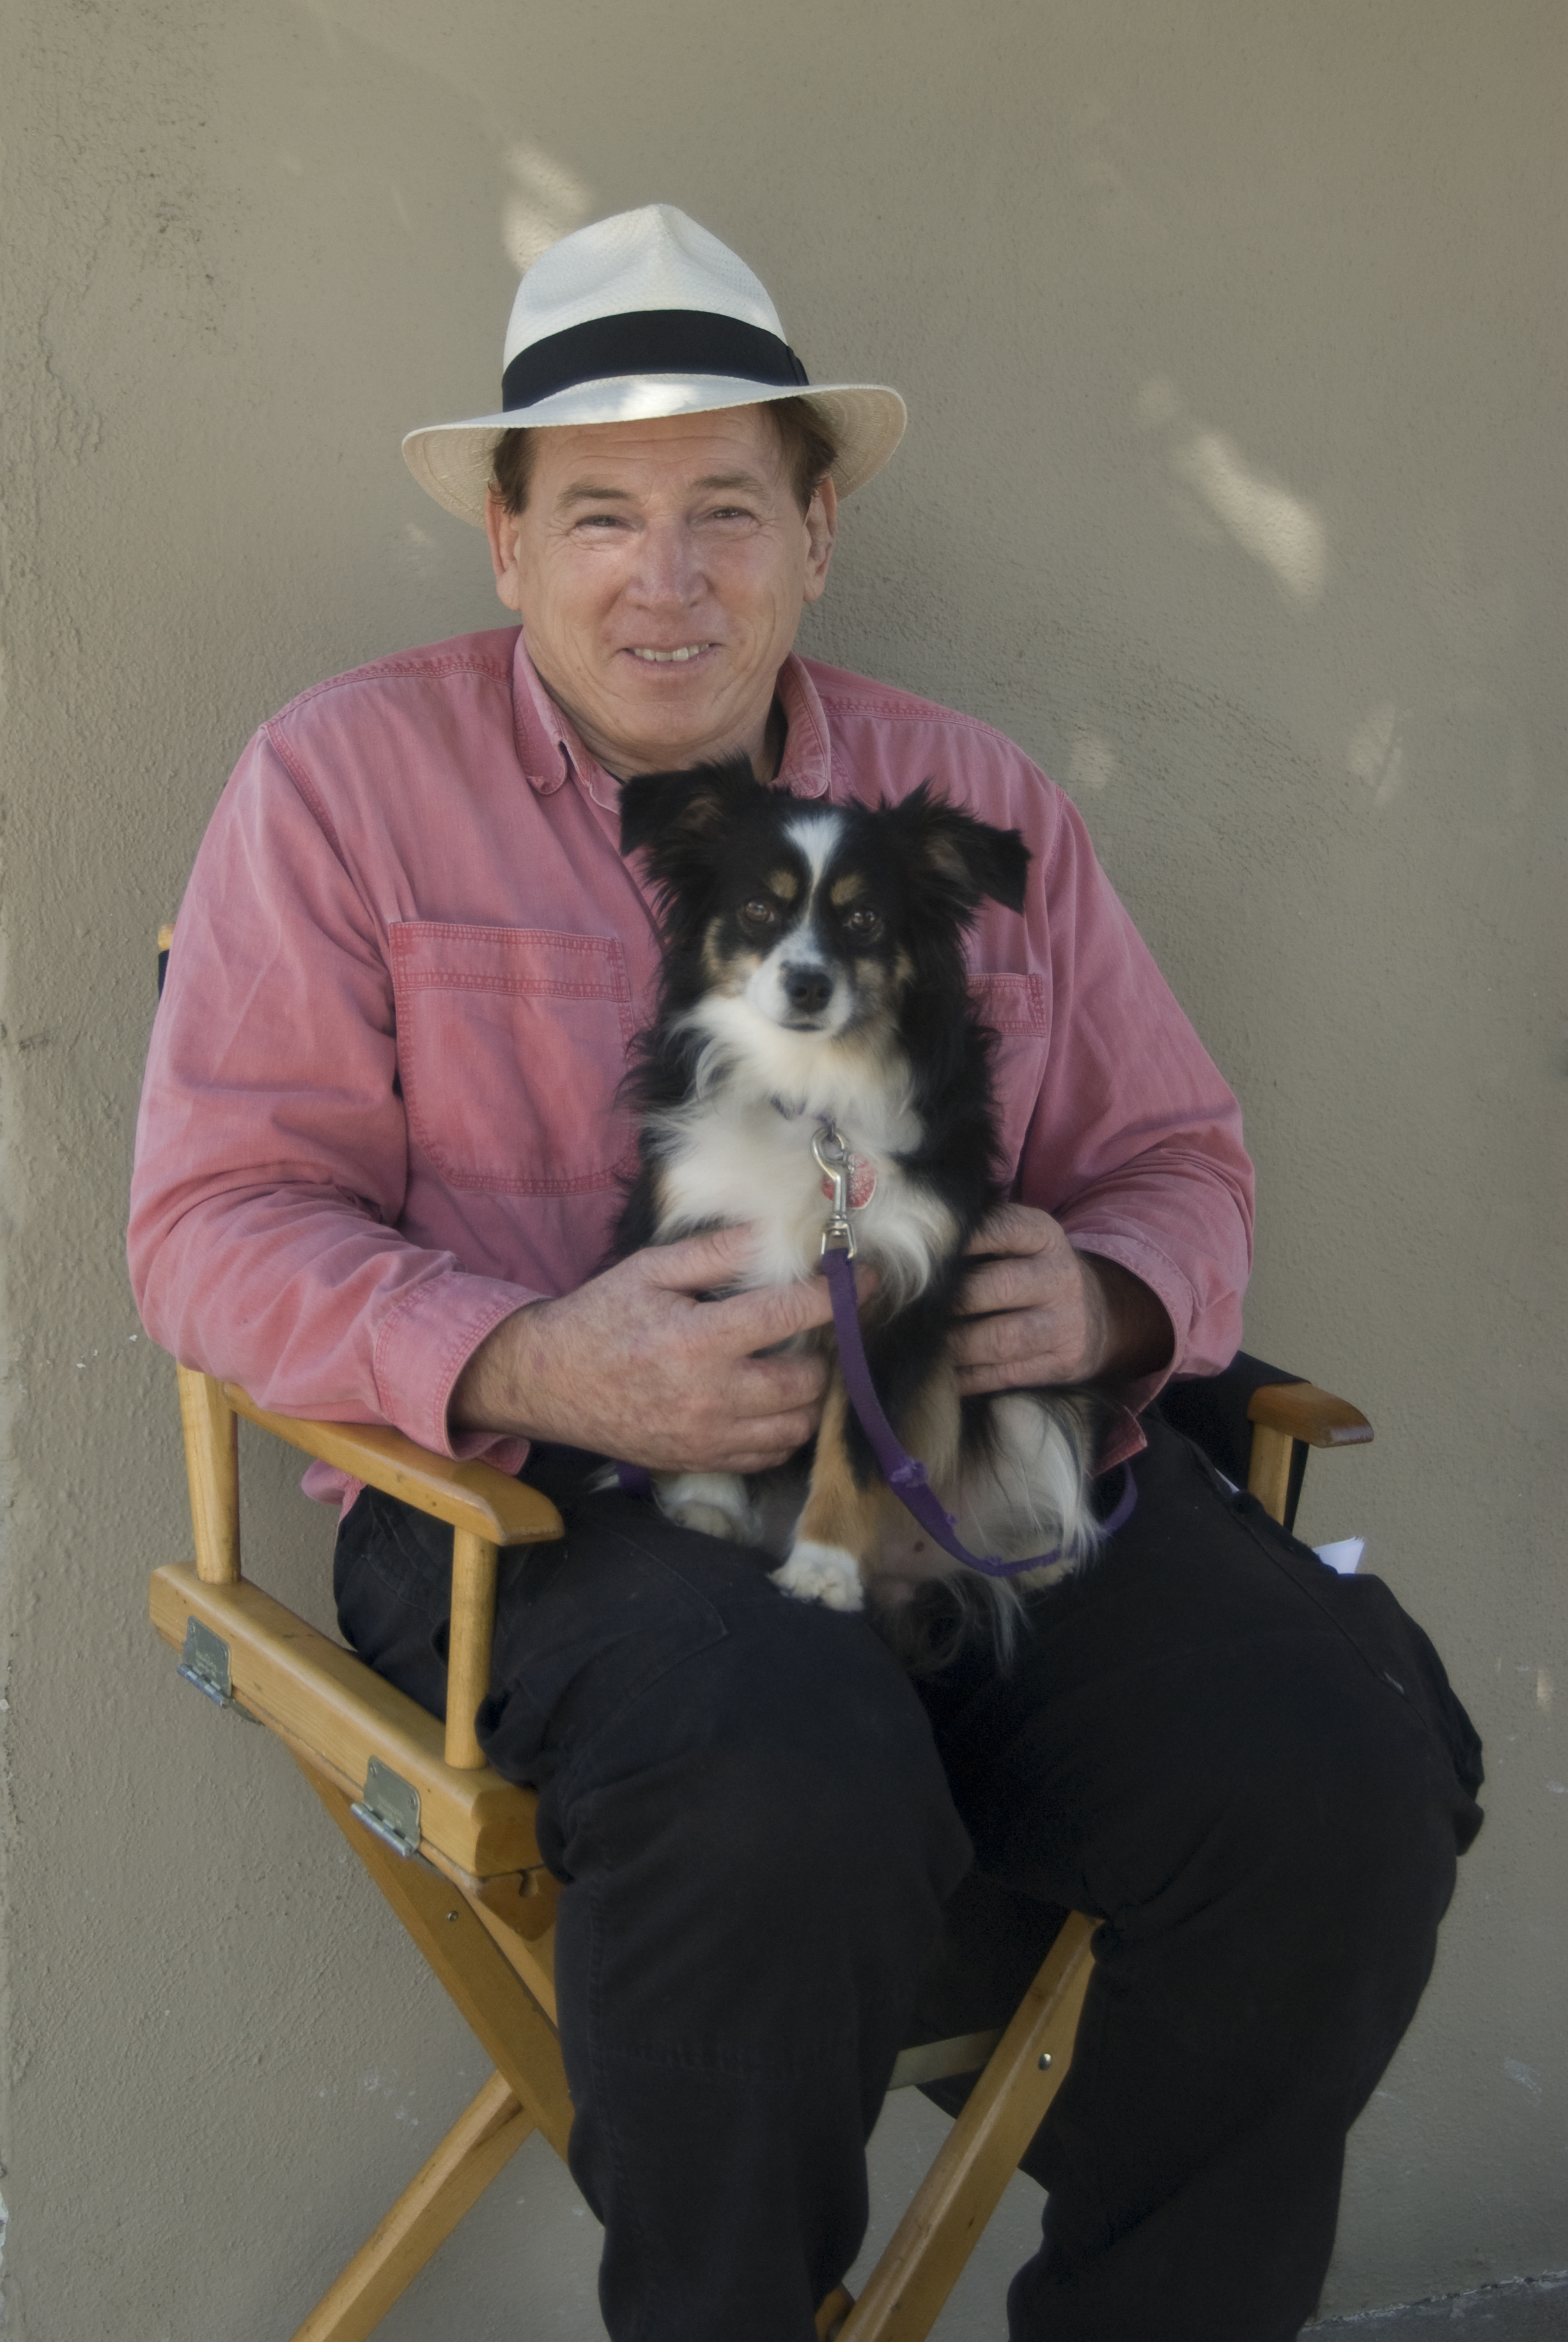 Daisy the Wonder Dog and trainer-wrangler Tim Halpin on the set of OBSTRUCTION.